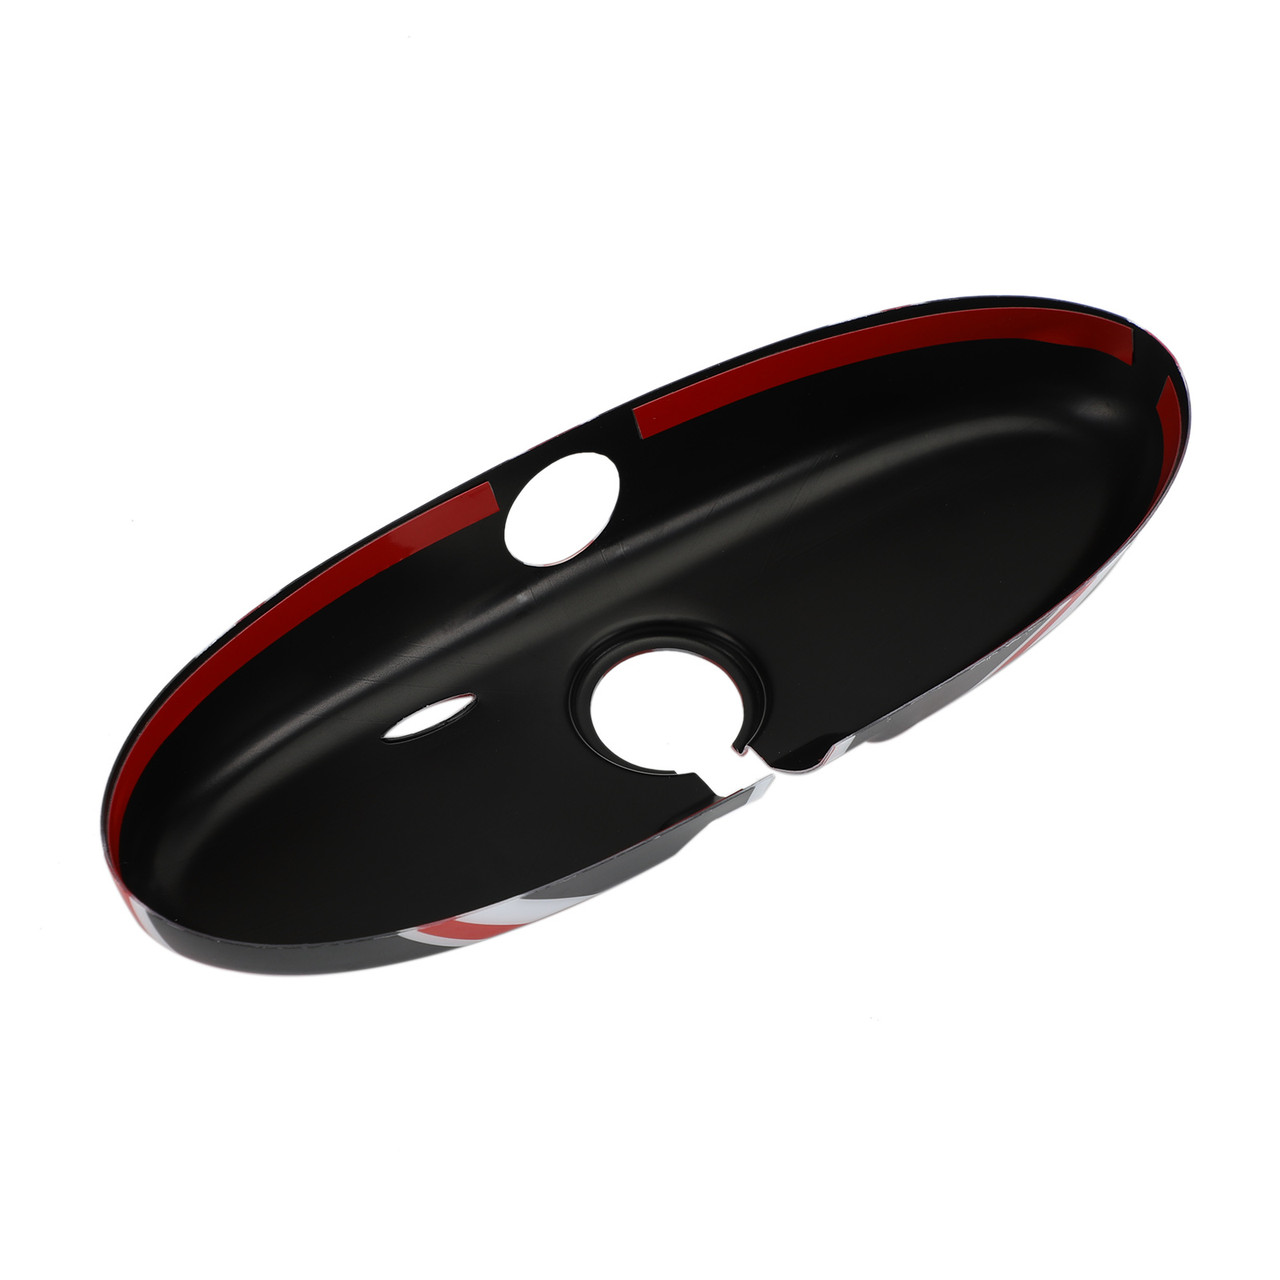 Union Jack UK Flag Rear View Mirror Cover Fit For MINI Cooper R55 R56 R57 Black/Red